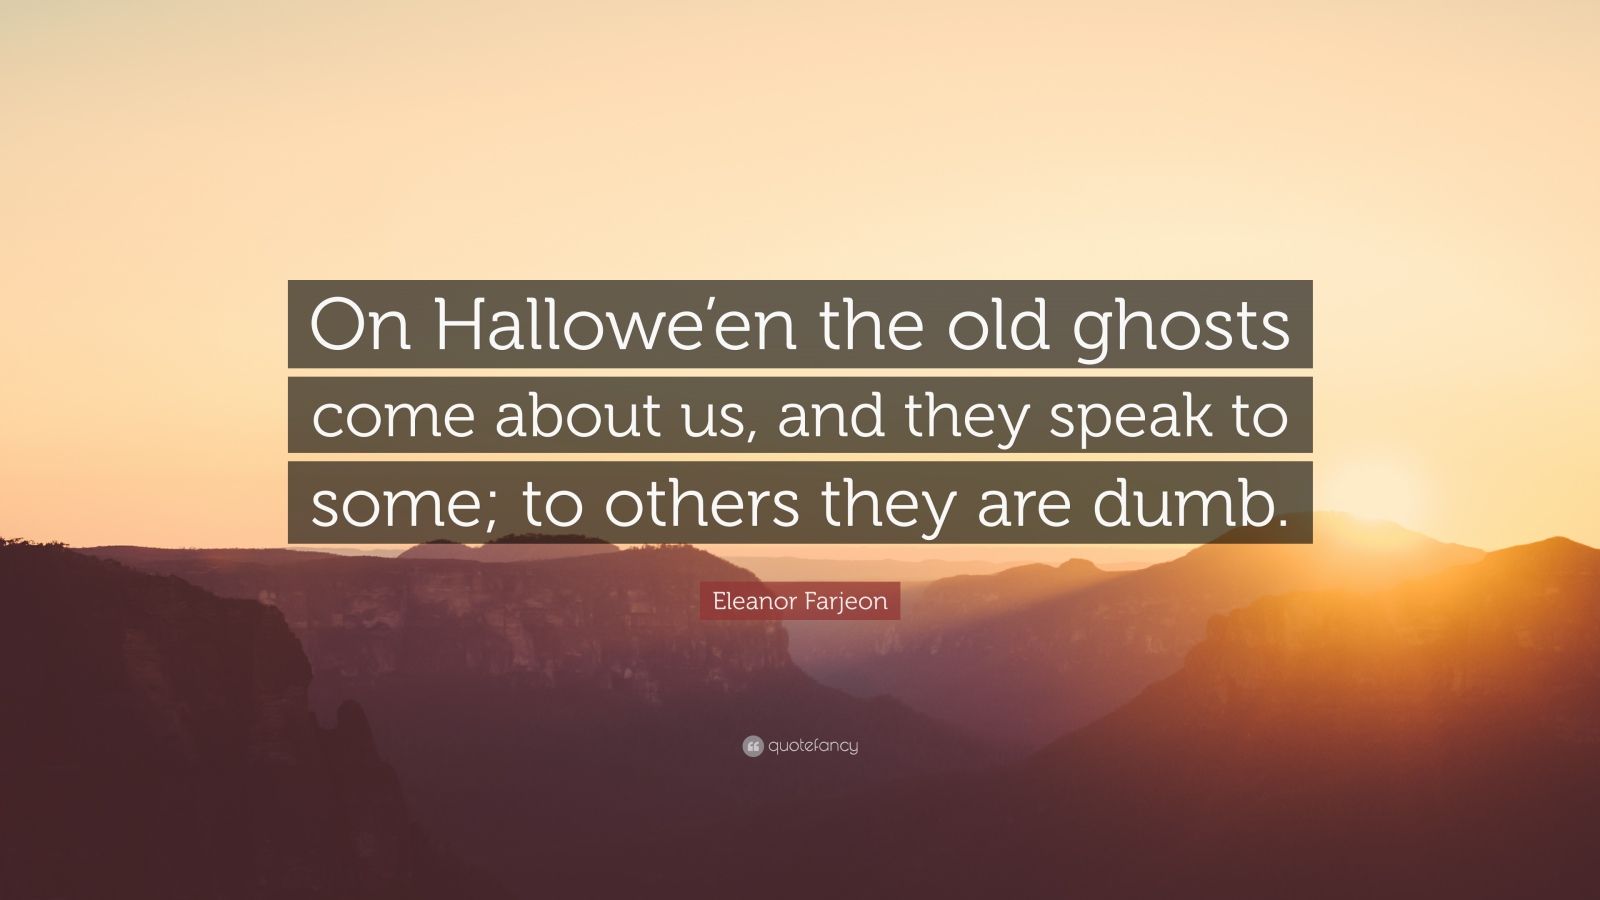 Eleanor Farjeon Quote: “On Hallowe'en the old ghosts come about us